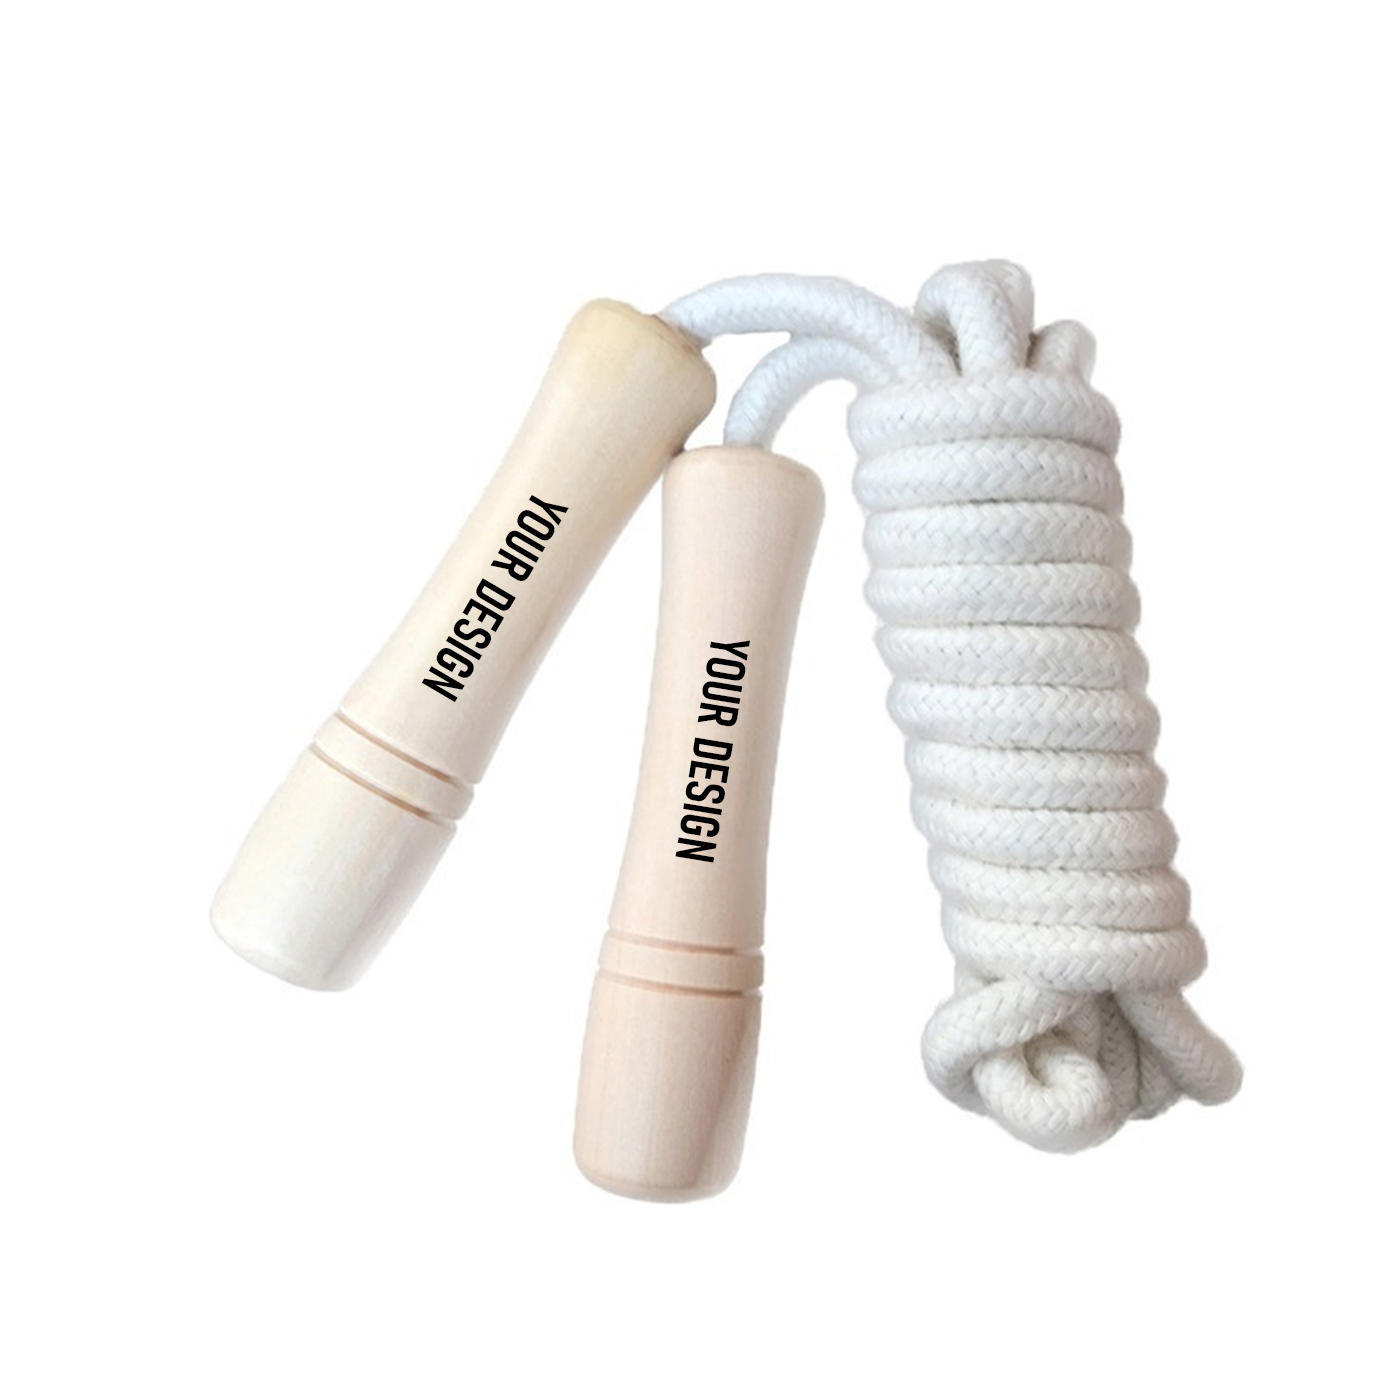 Wooden Handle Cotton Skipping Rope